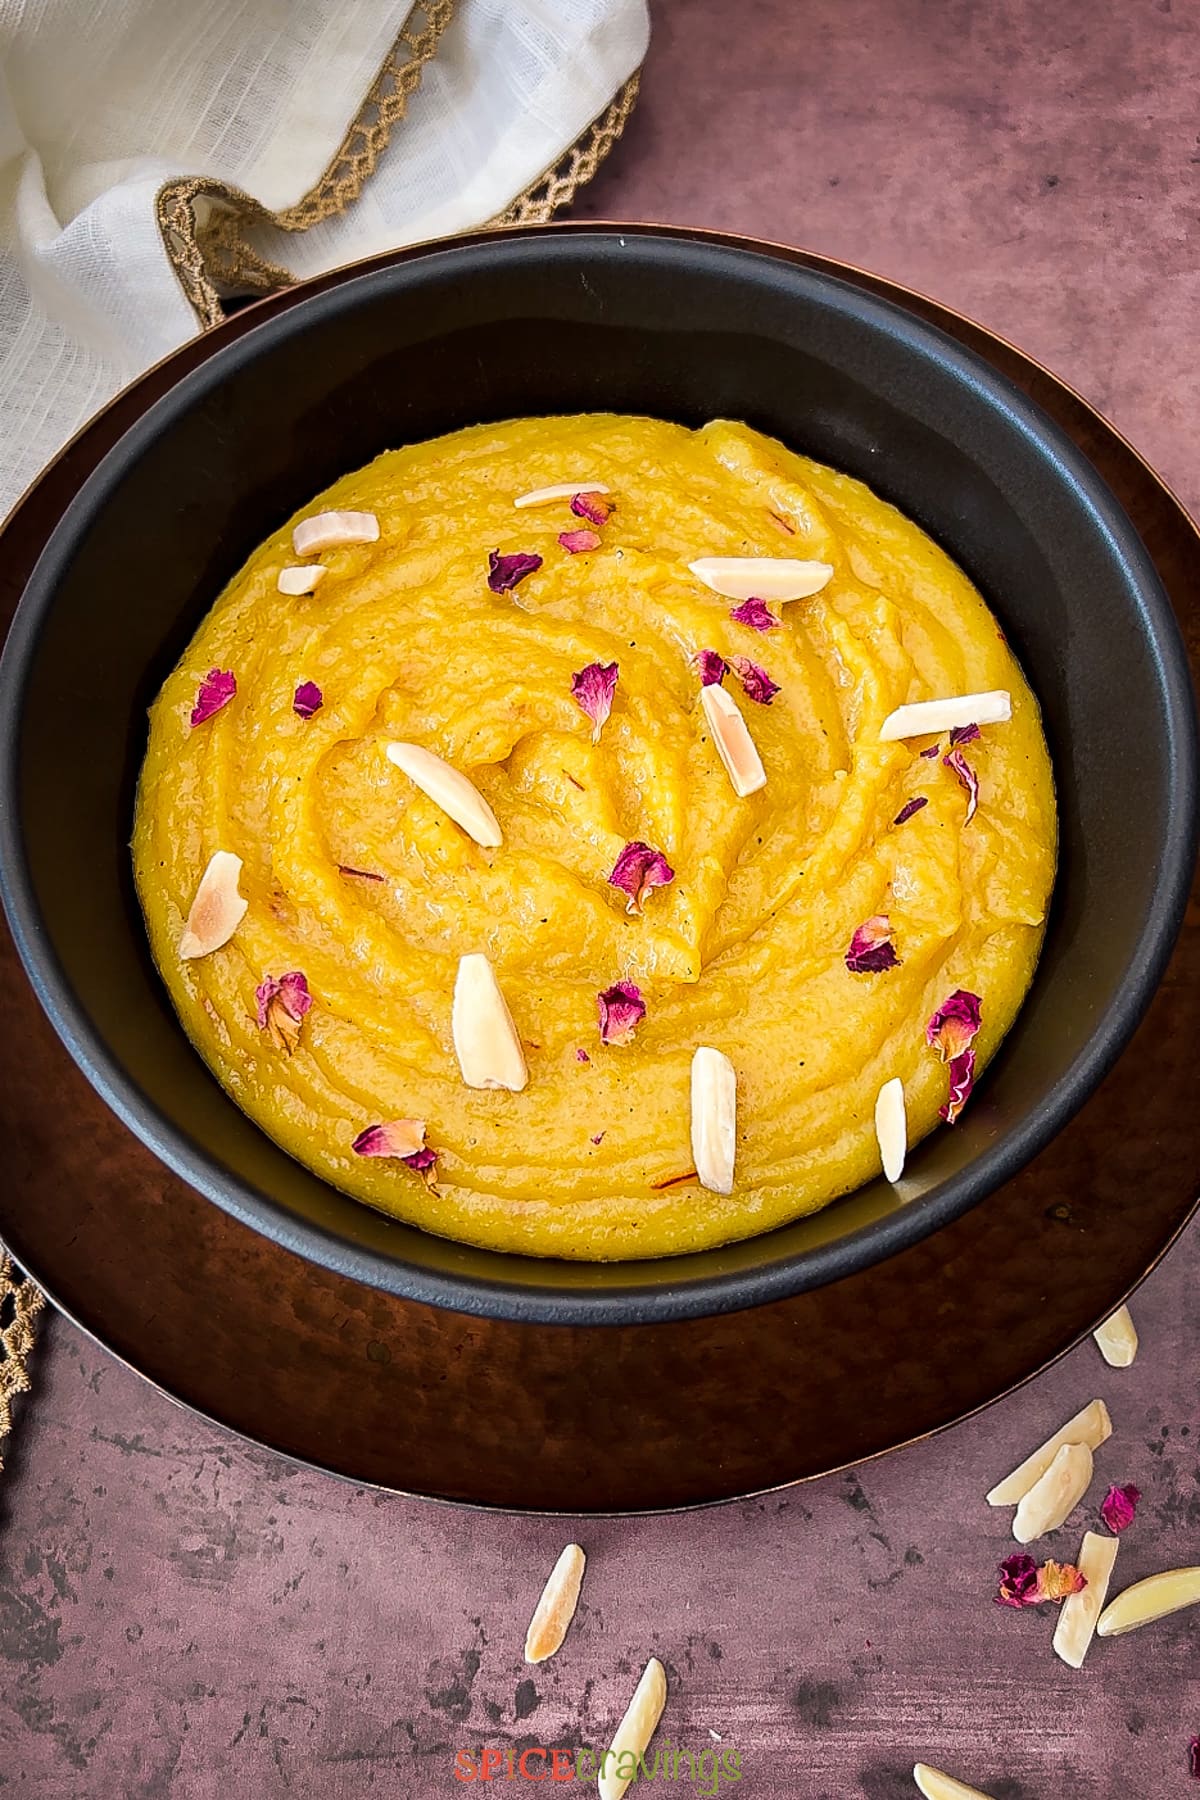 Almond pudding in black bowl garnished with dried rose petals and slivered almonds